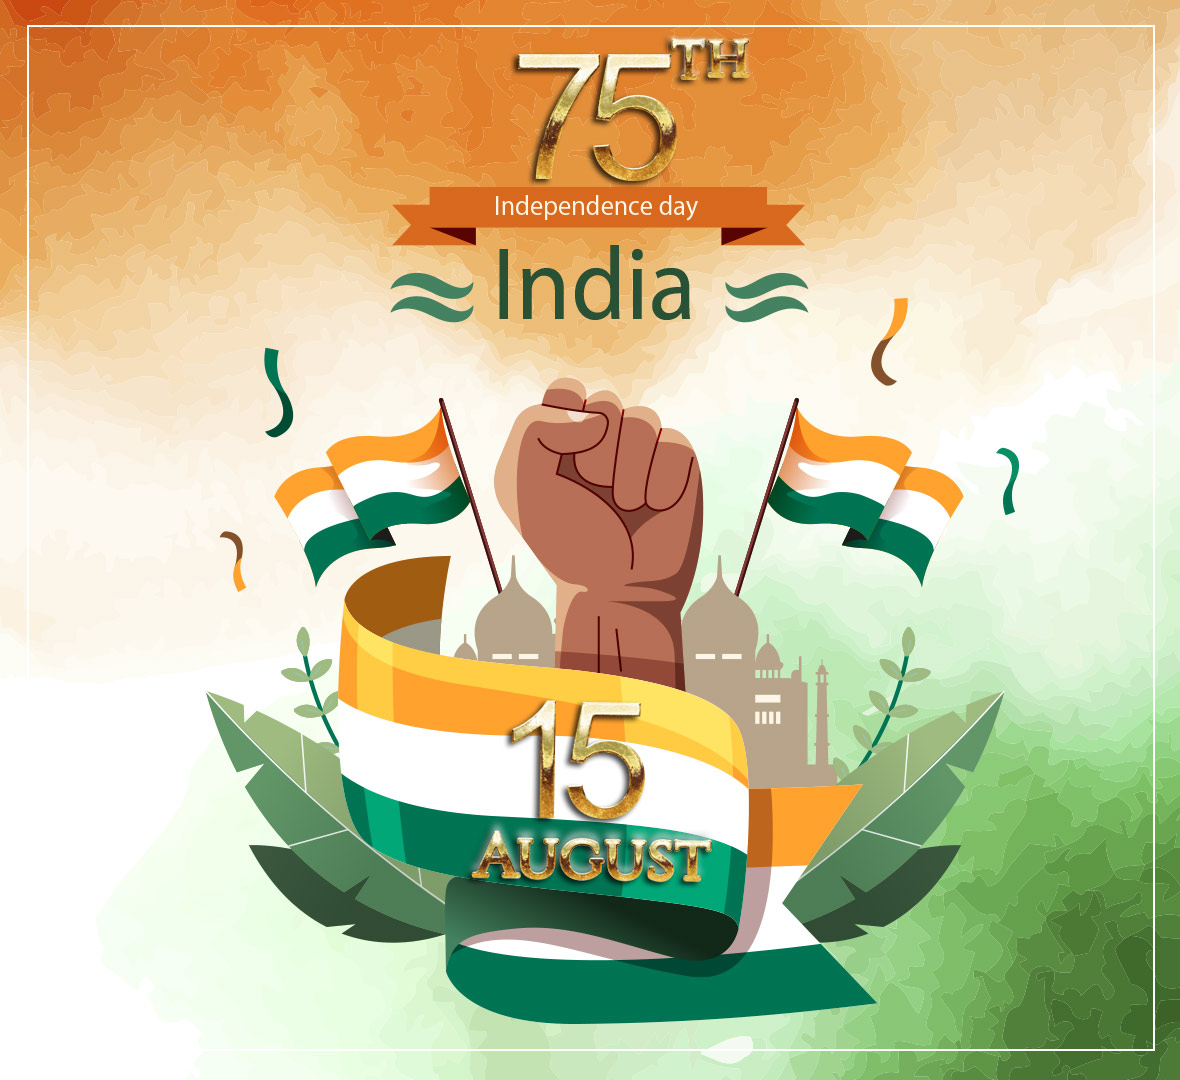 75th India independence day images HD wallpapers, greetings and status